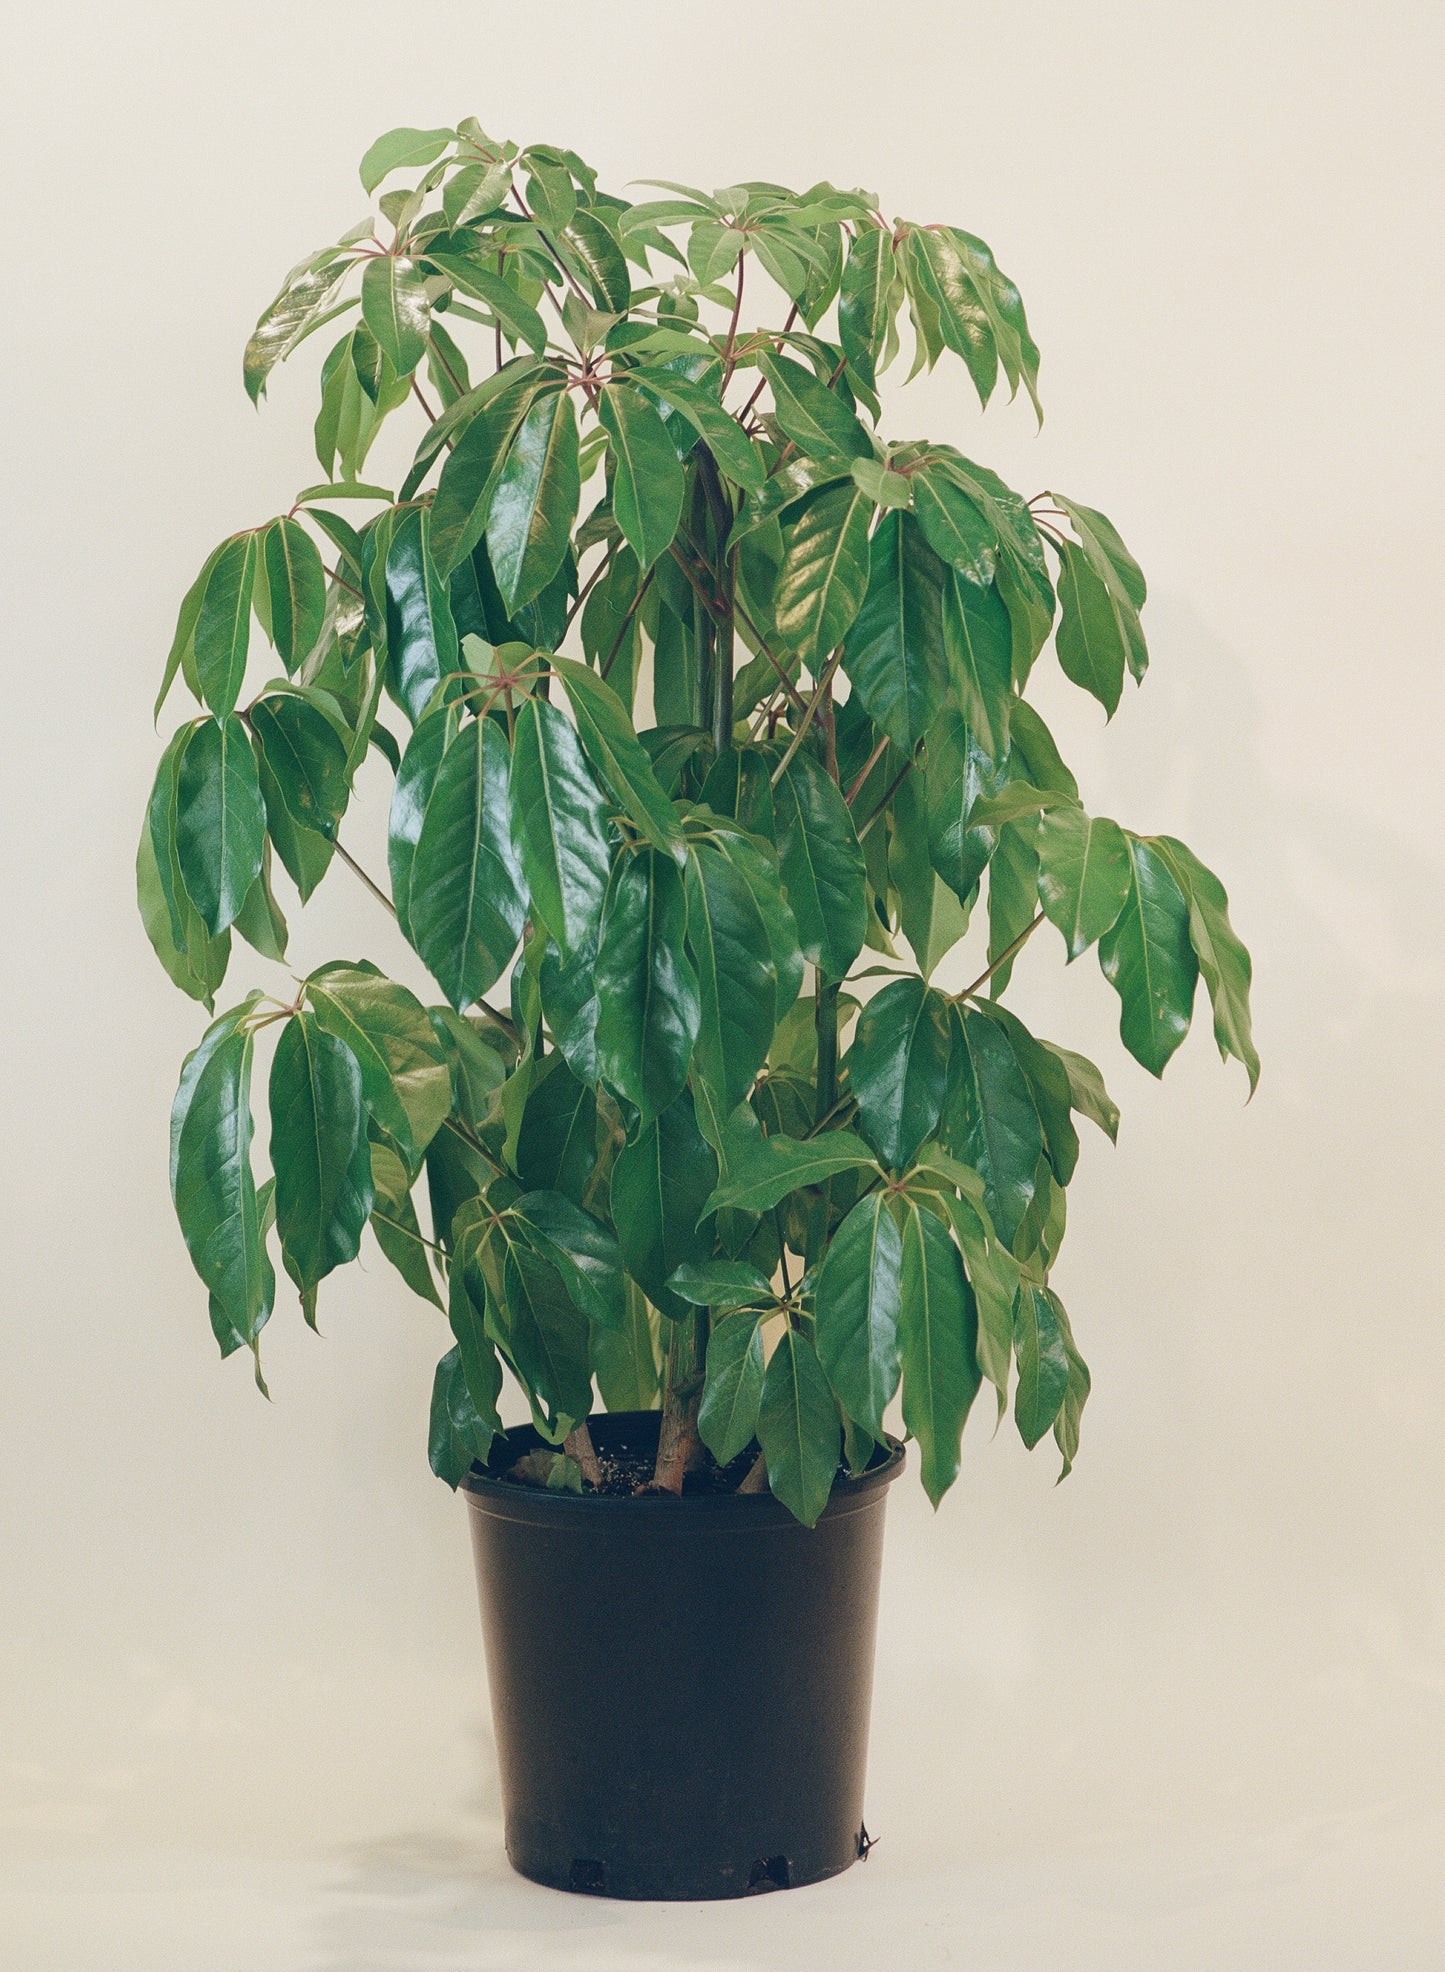 Umbrella Tree, Australia Umbrella Tree (Schefflera actinophylla) in a 14 inch pot. Indoor plant for sale by Promise Supply for delivery and pickup in Toronto